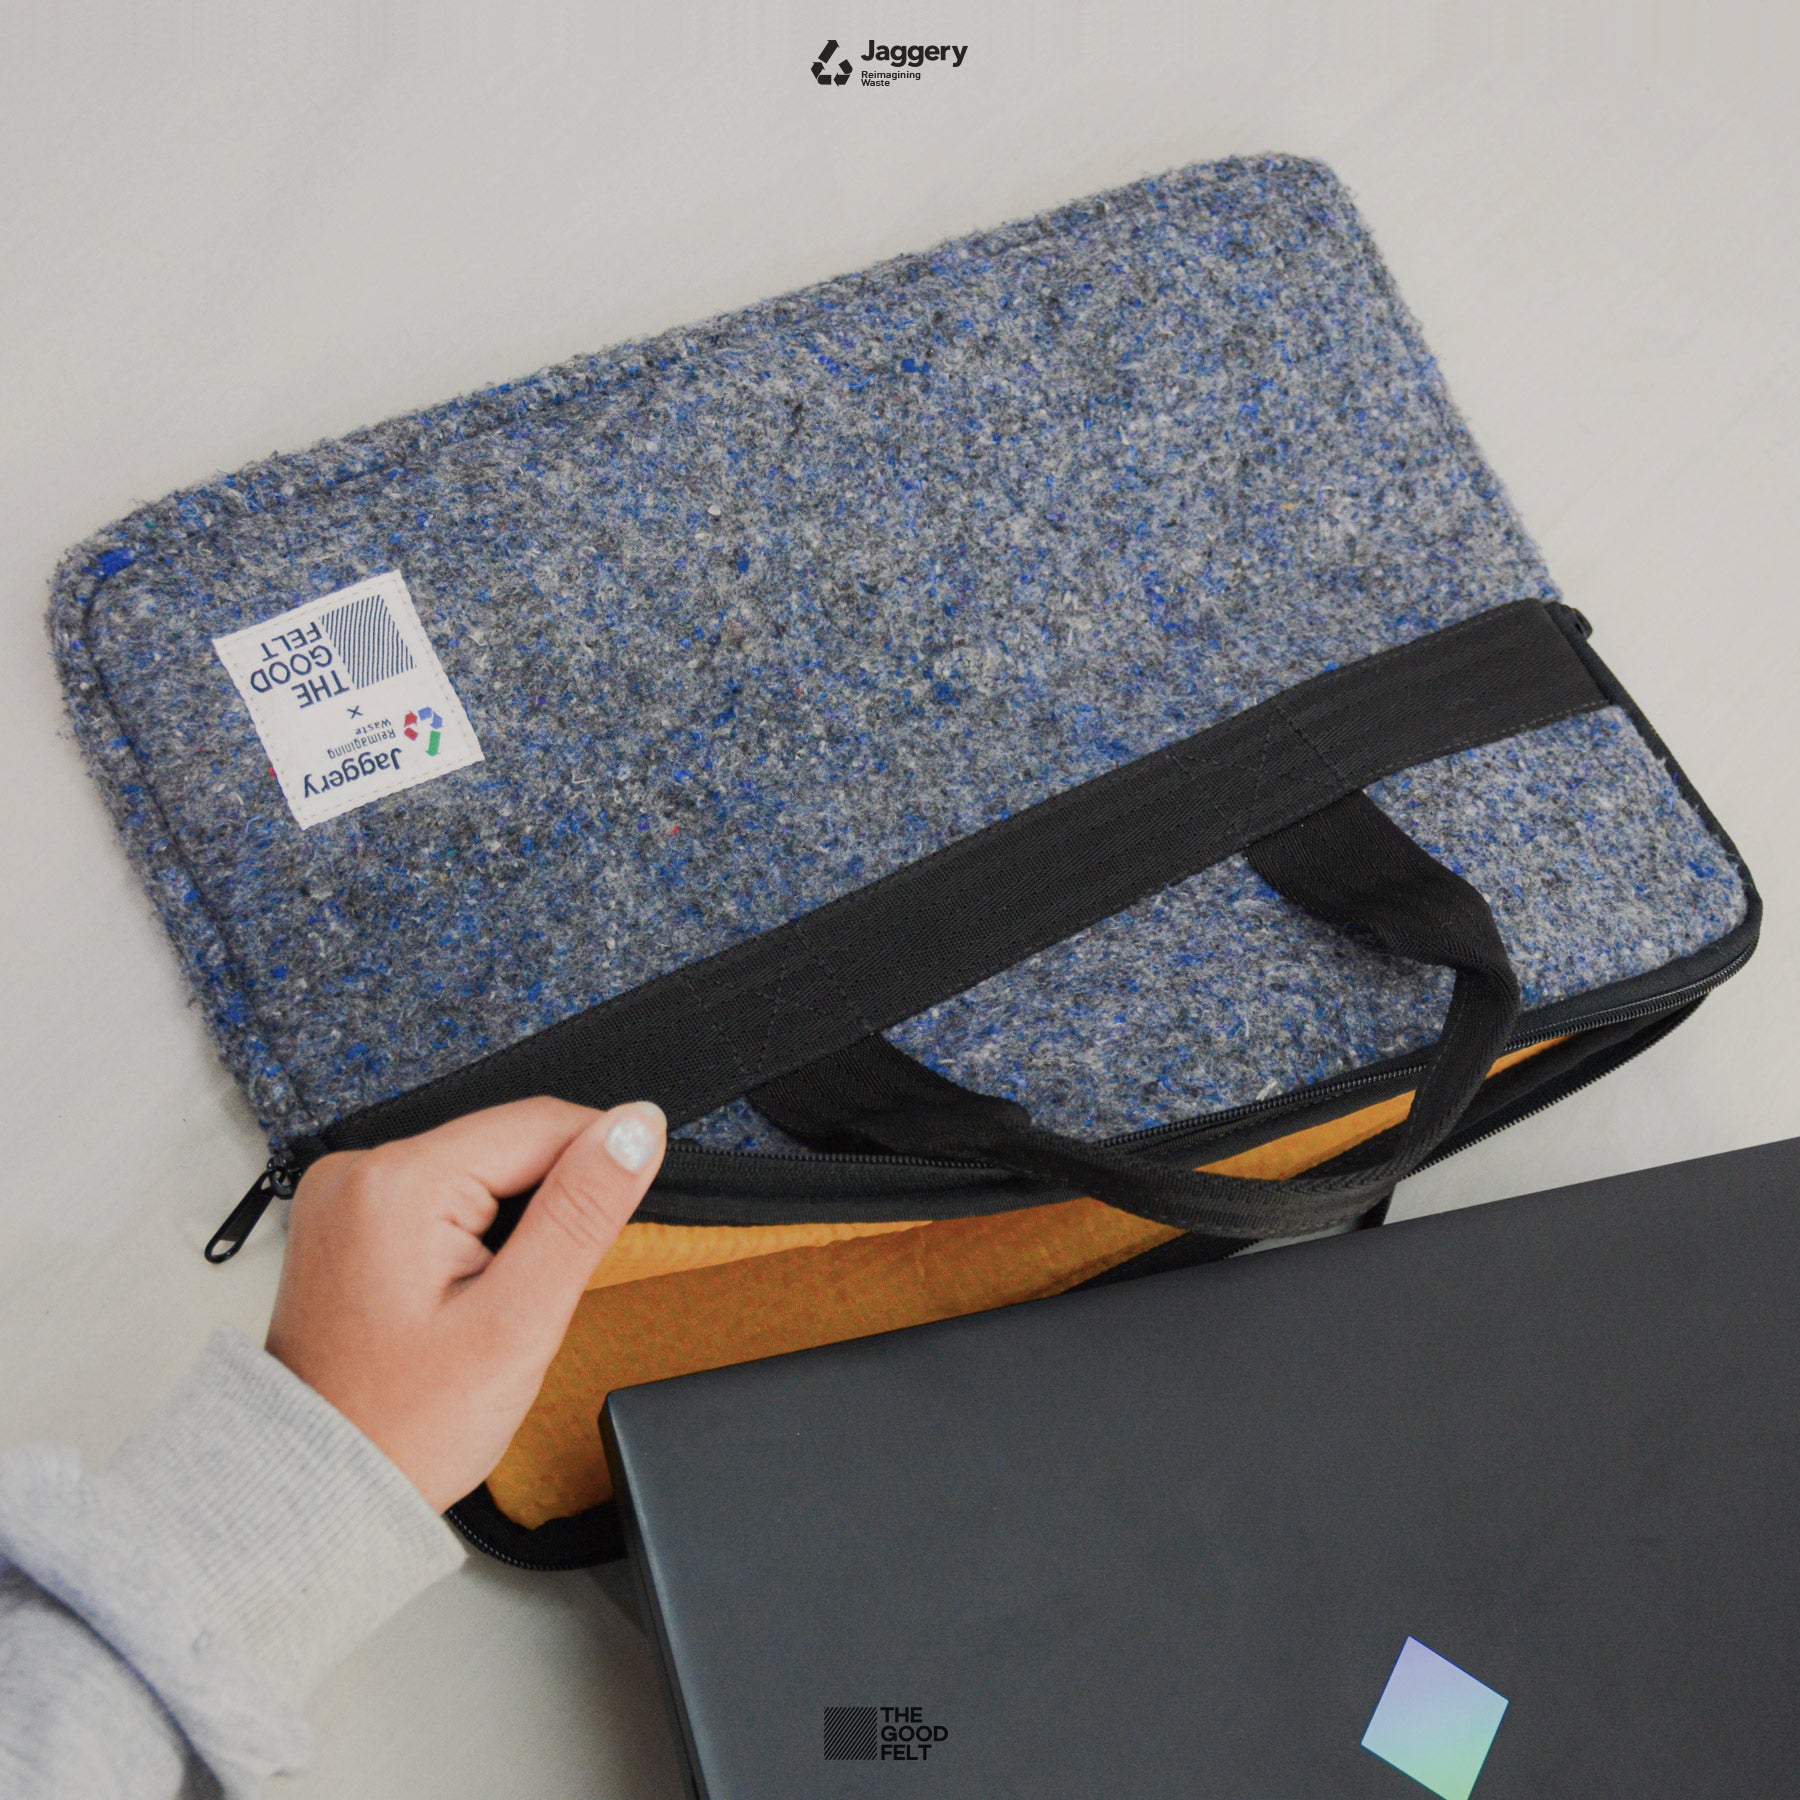 The Good Laptop Sleeve (15") in Grey Felt and Rescued Black Car Seat Belts